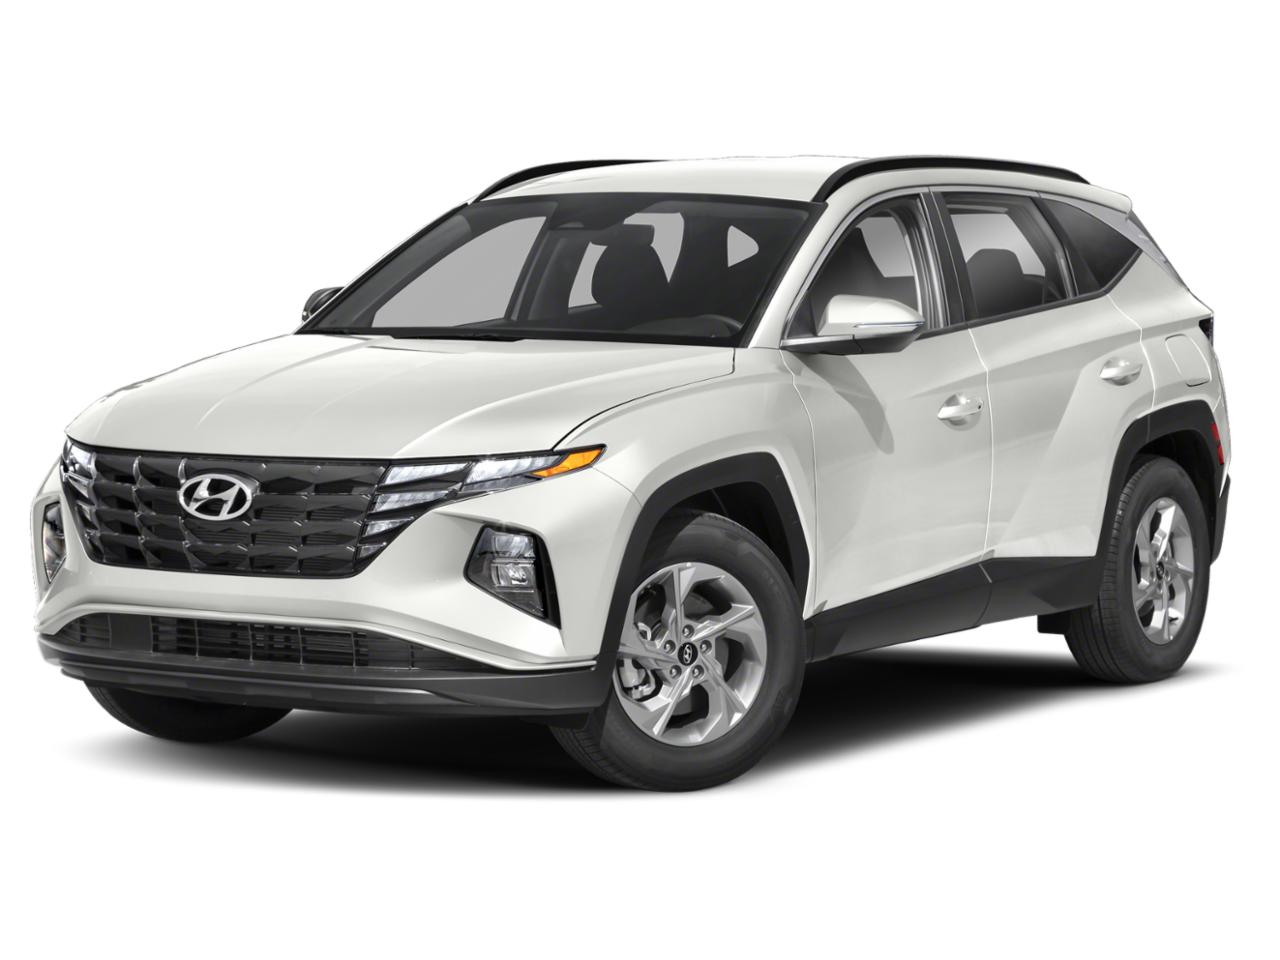 Hyundai's special offers include cash bonuses and incentives that complement great auto finance options. 2022 Hyundai Tucson SEL FWD for Sale in Gilroy - Quartz